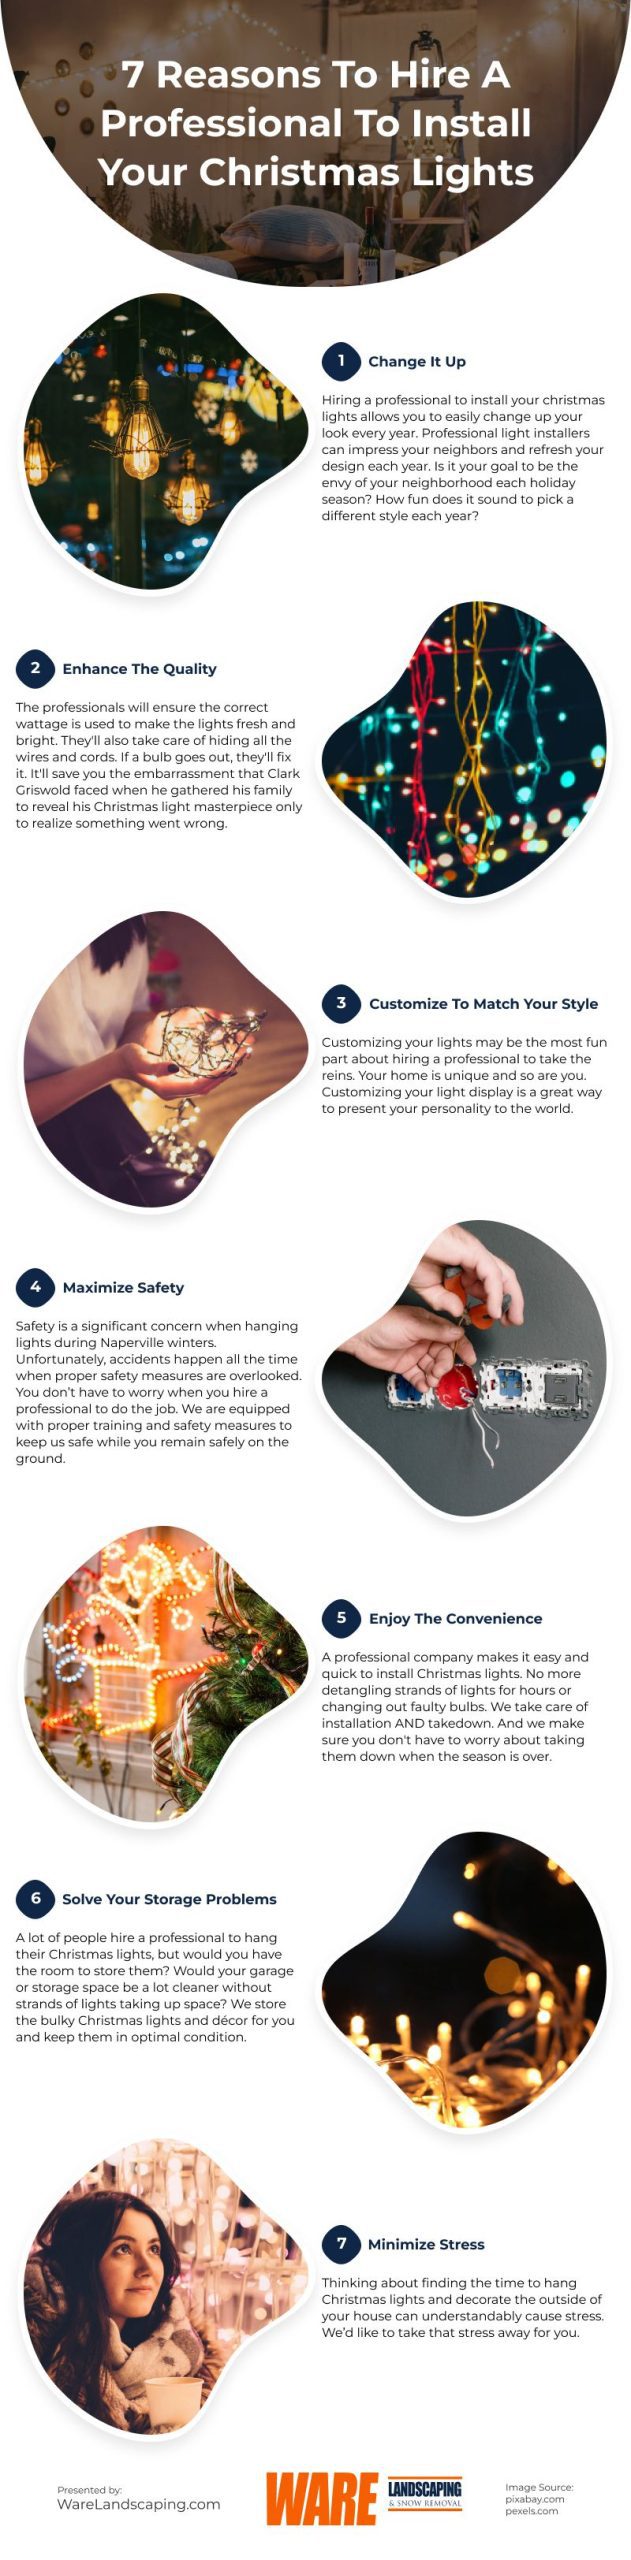 7 Reasons to Hire a Professional to Install Your Christmas Lights Infographic